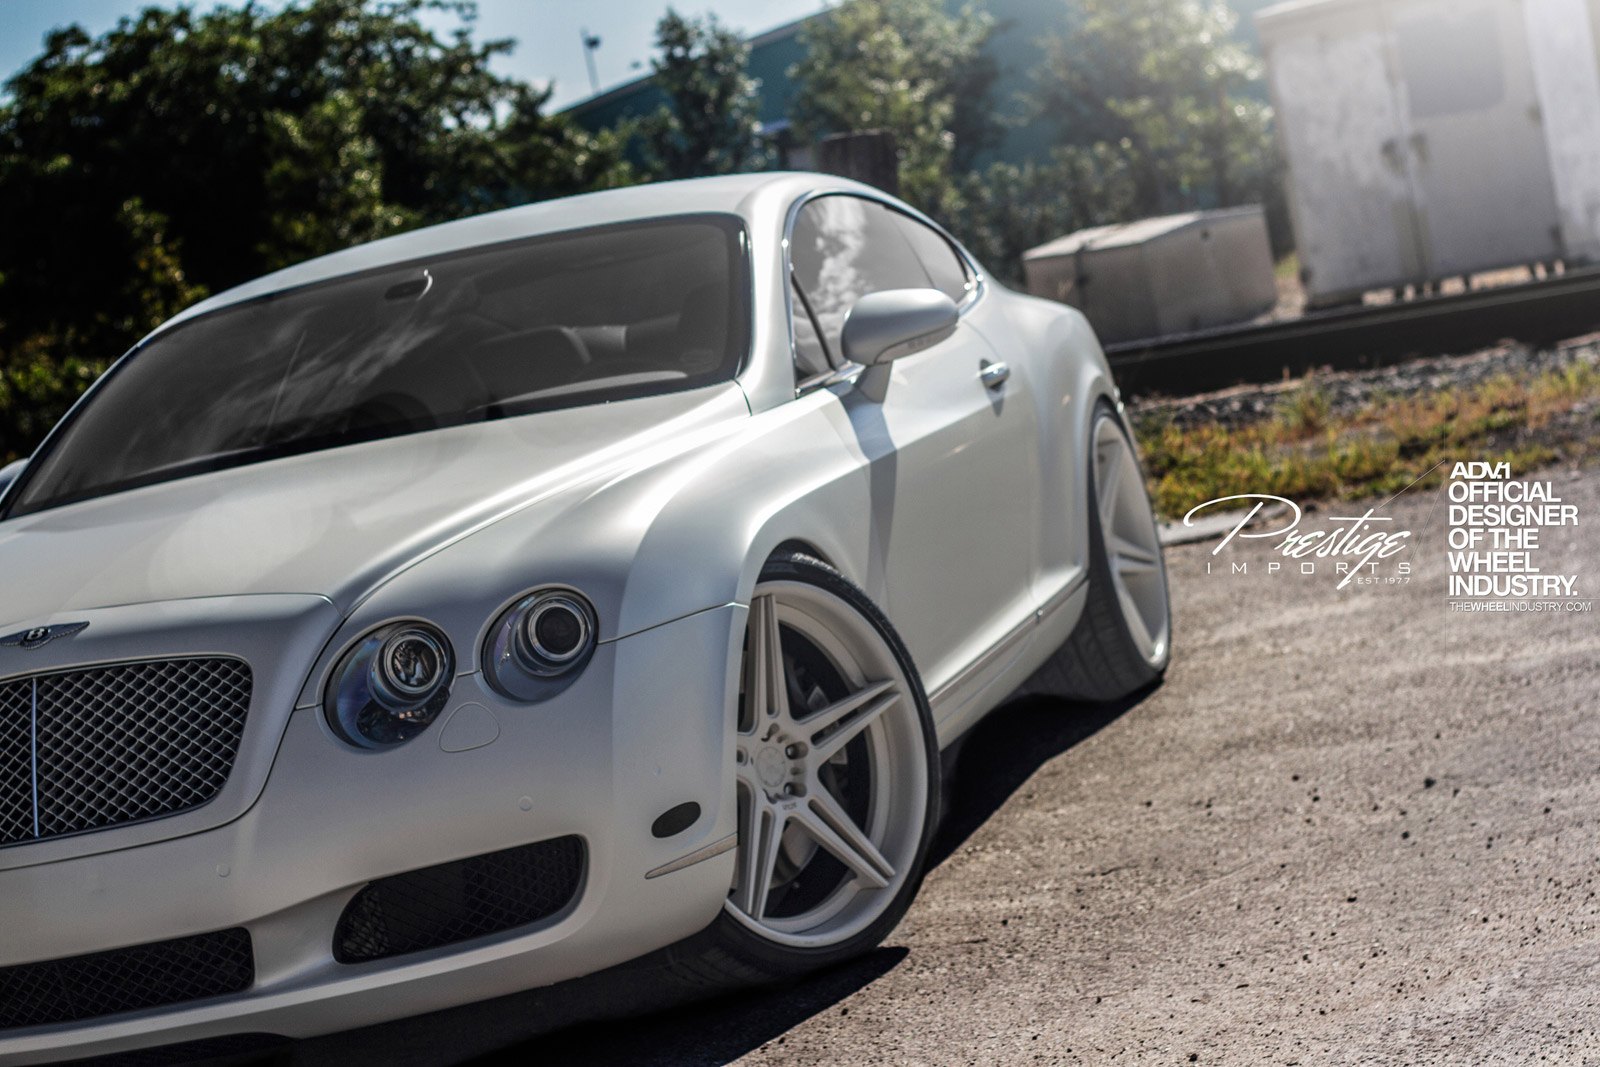 Aftermarket Halo Headlights on White Bentley Continental - Photo by ADV.1